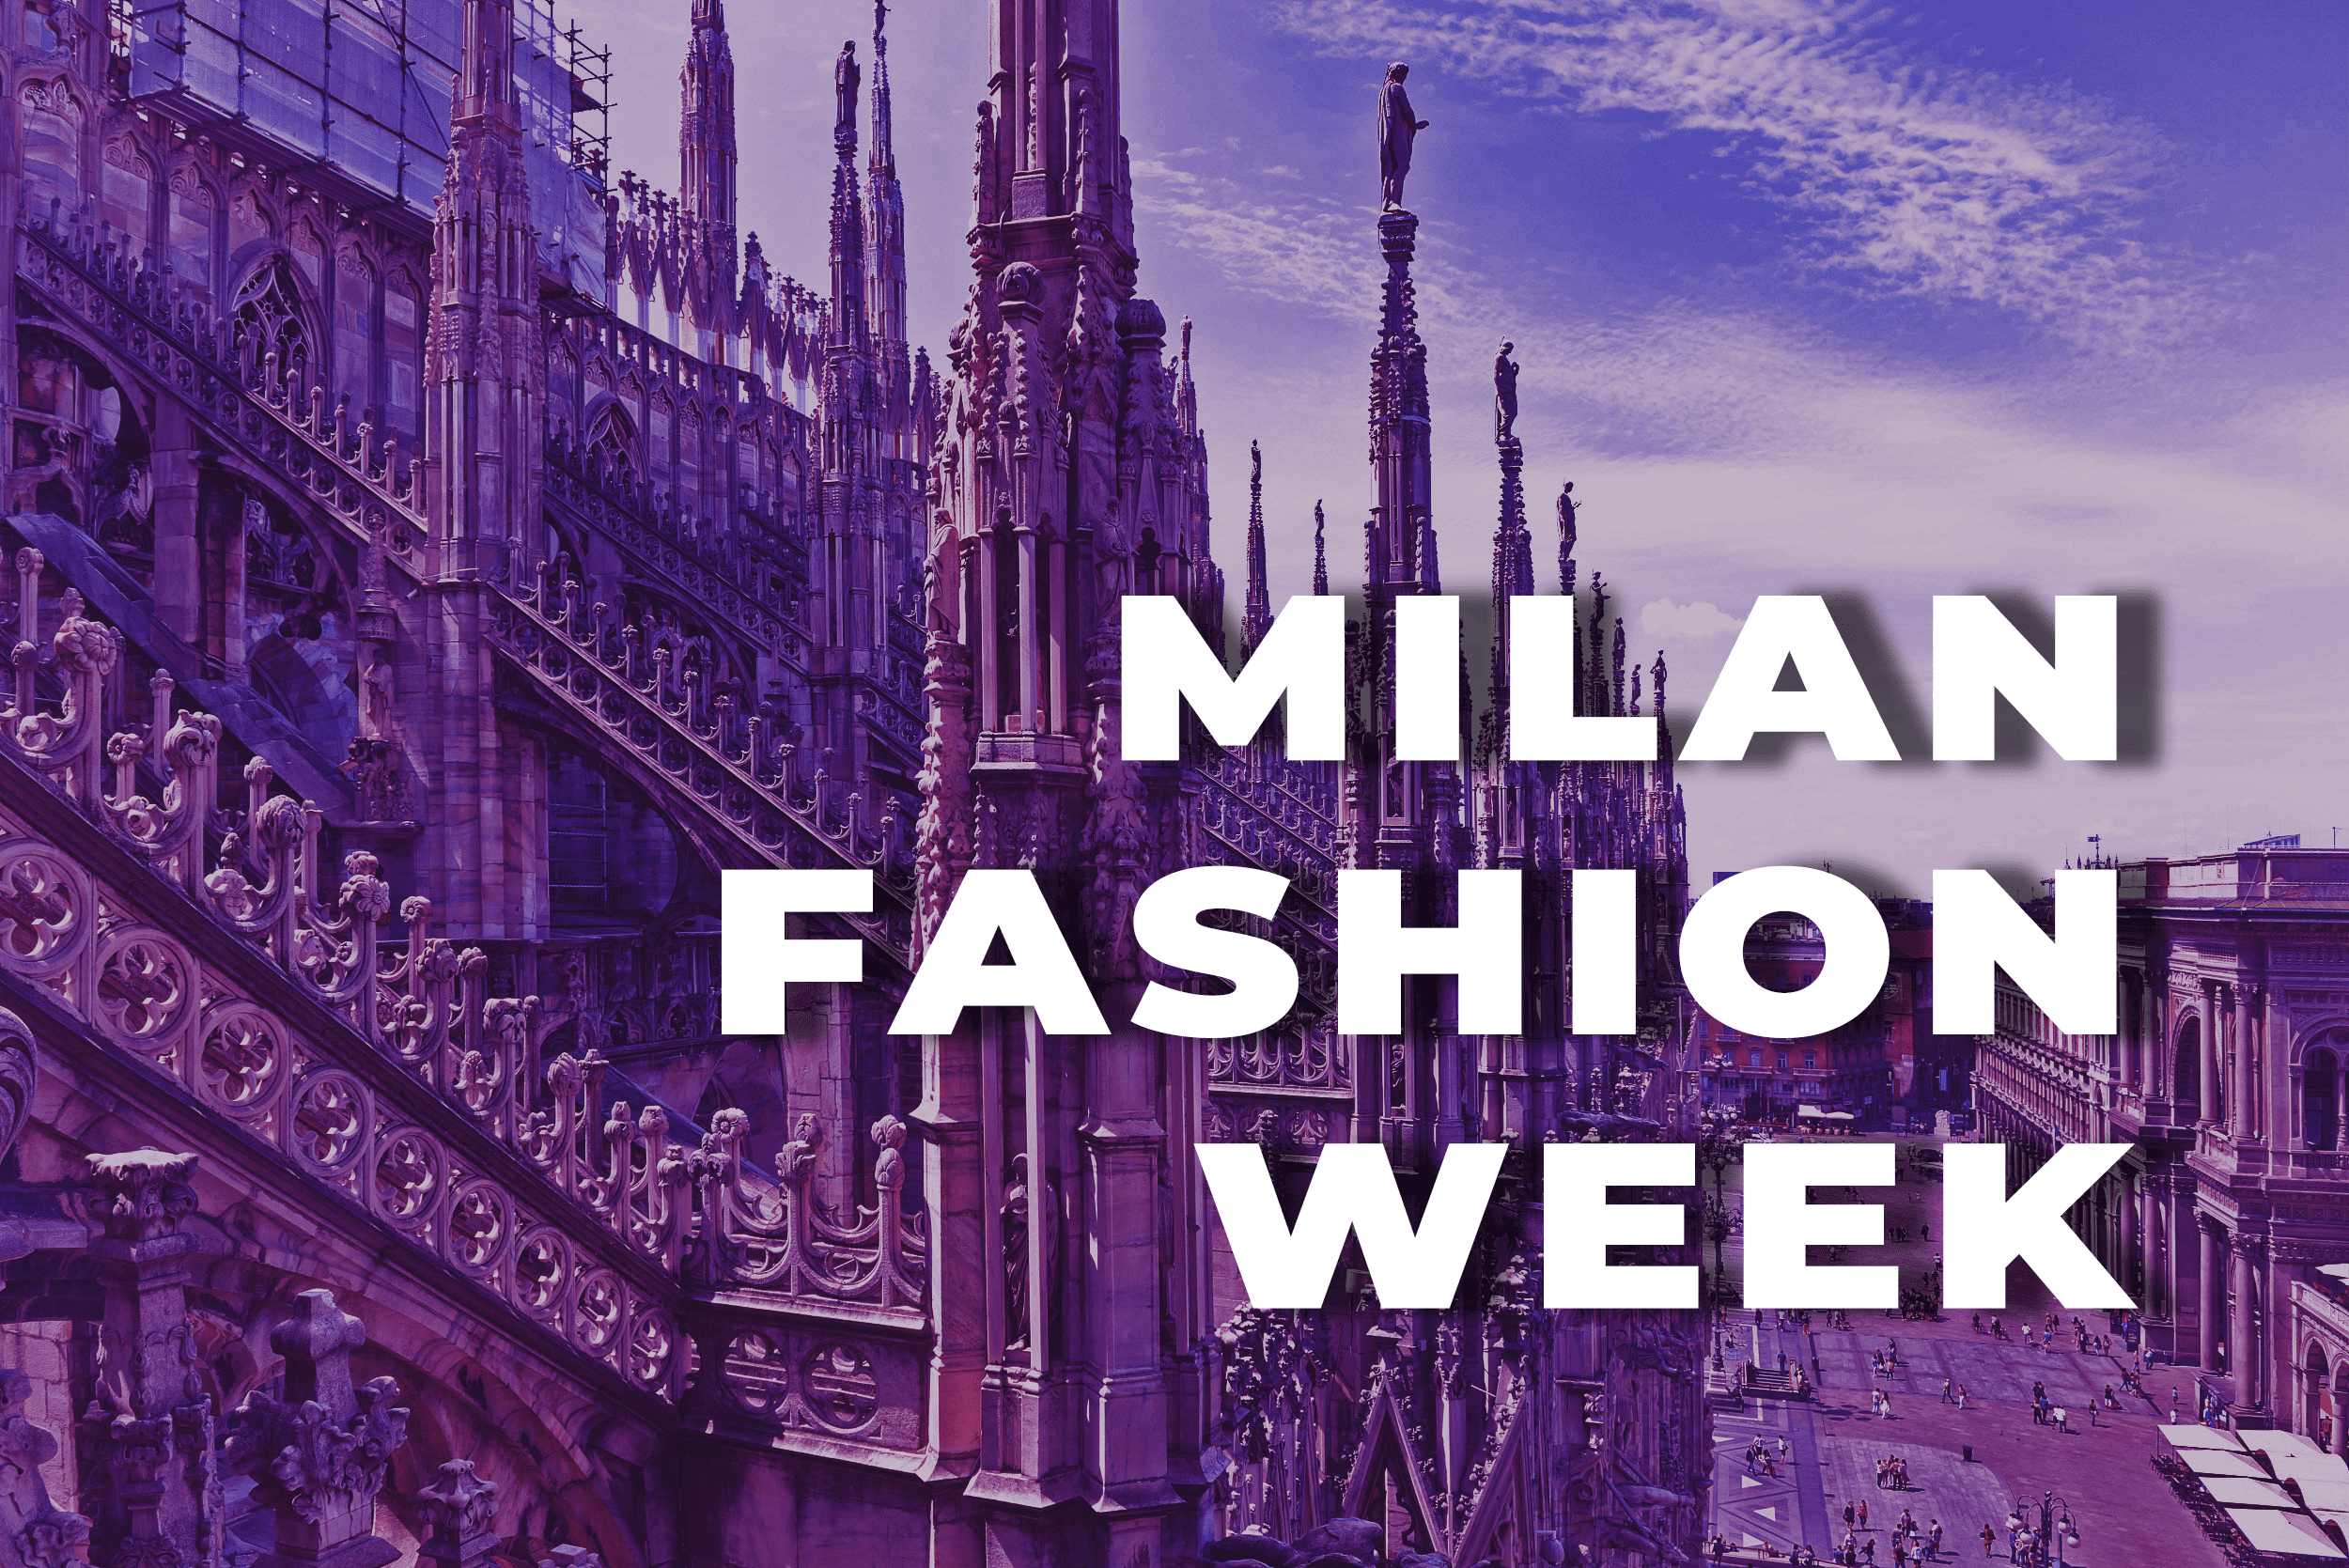 Milan Fashion Week 2022 – 2023. Dates and Schedule. Everything You Need to Know About